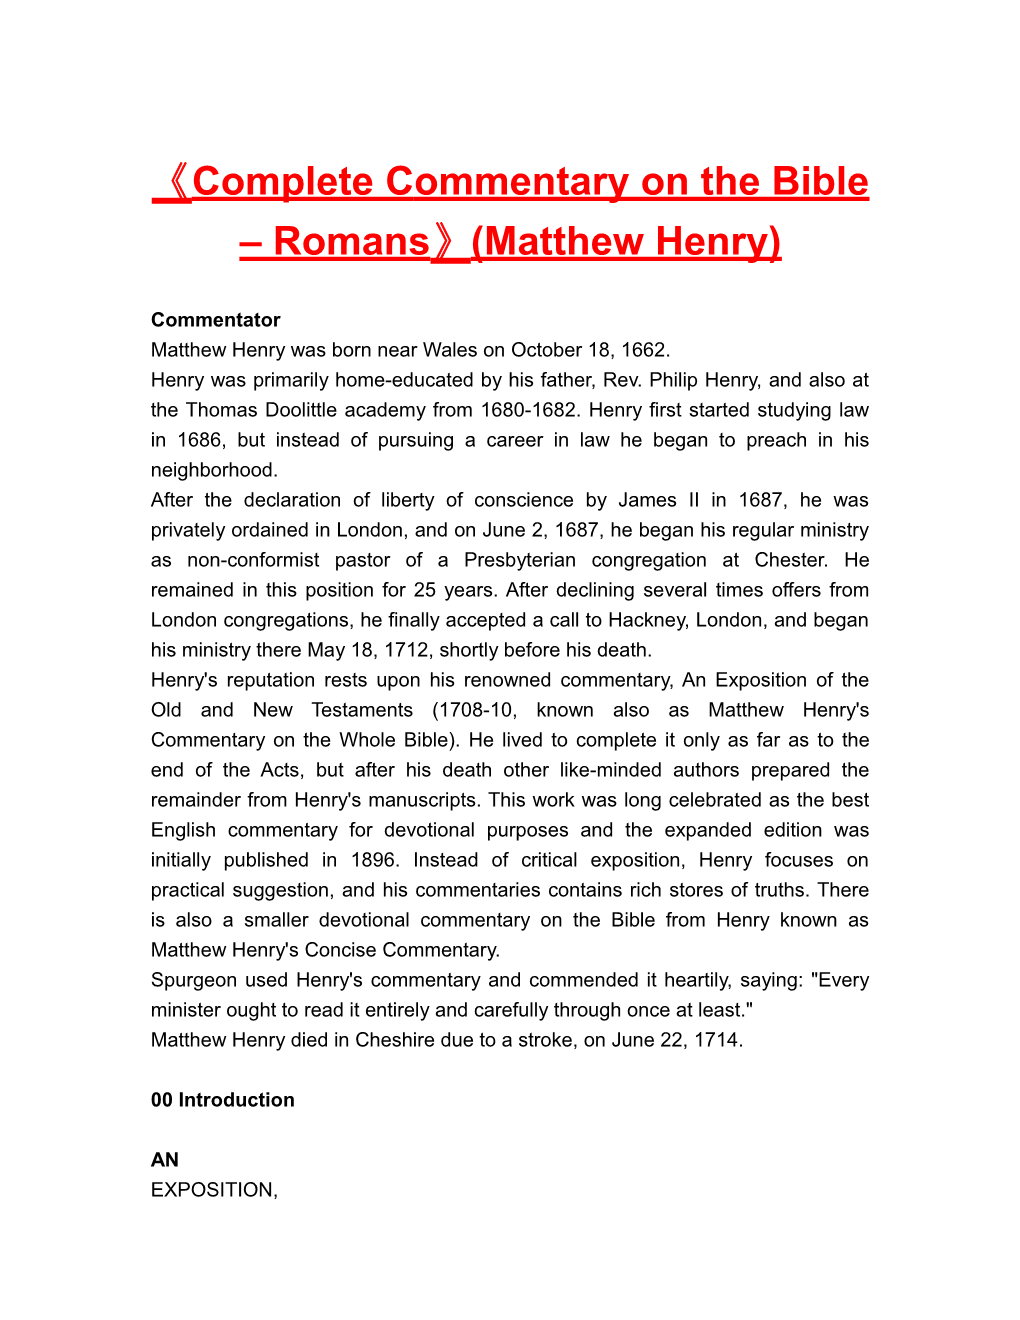 Completecommentary on the Bible Romans (Matthew Henry)